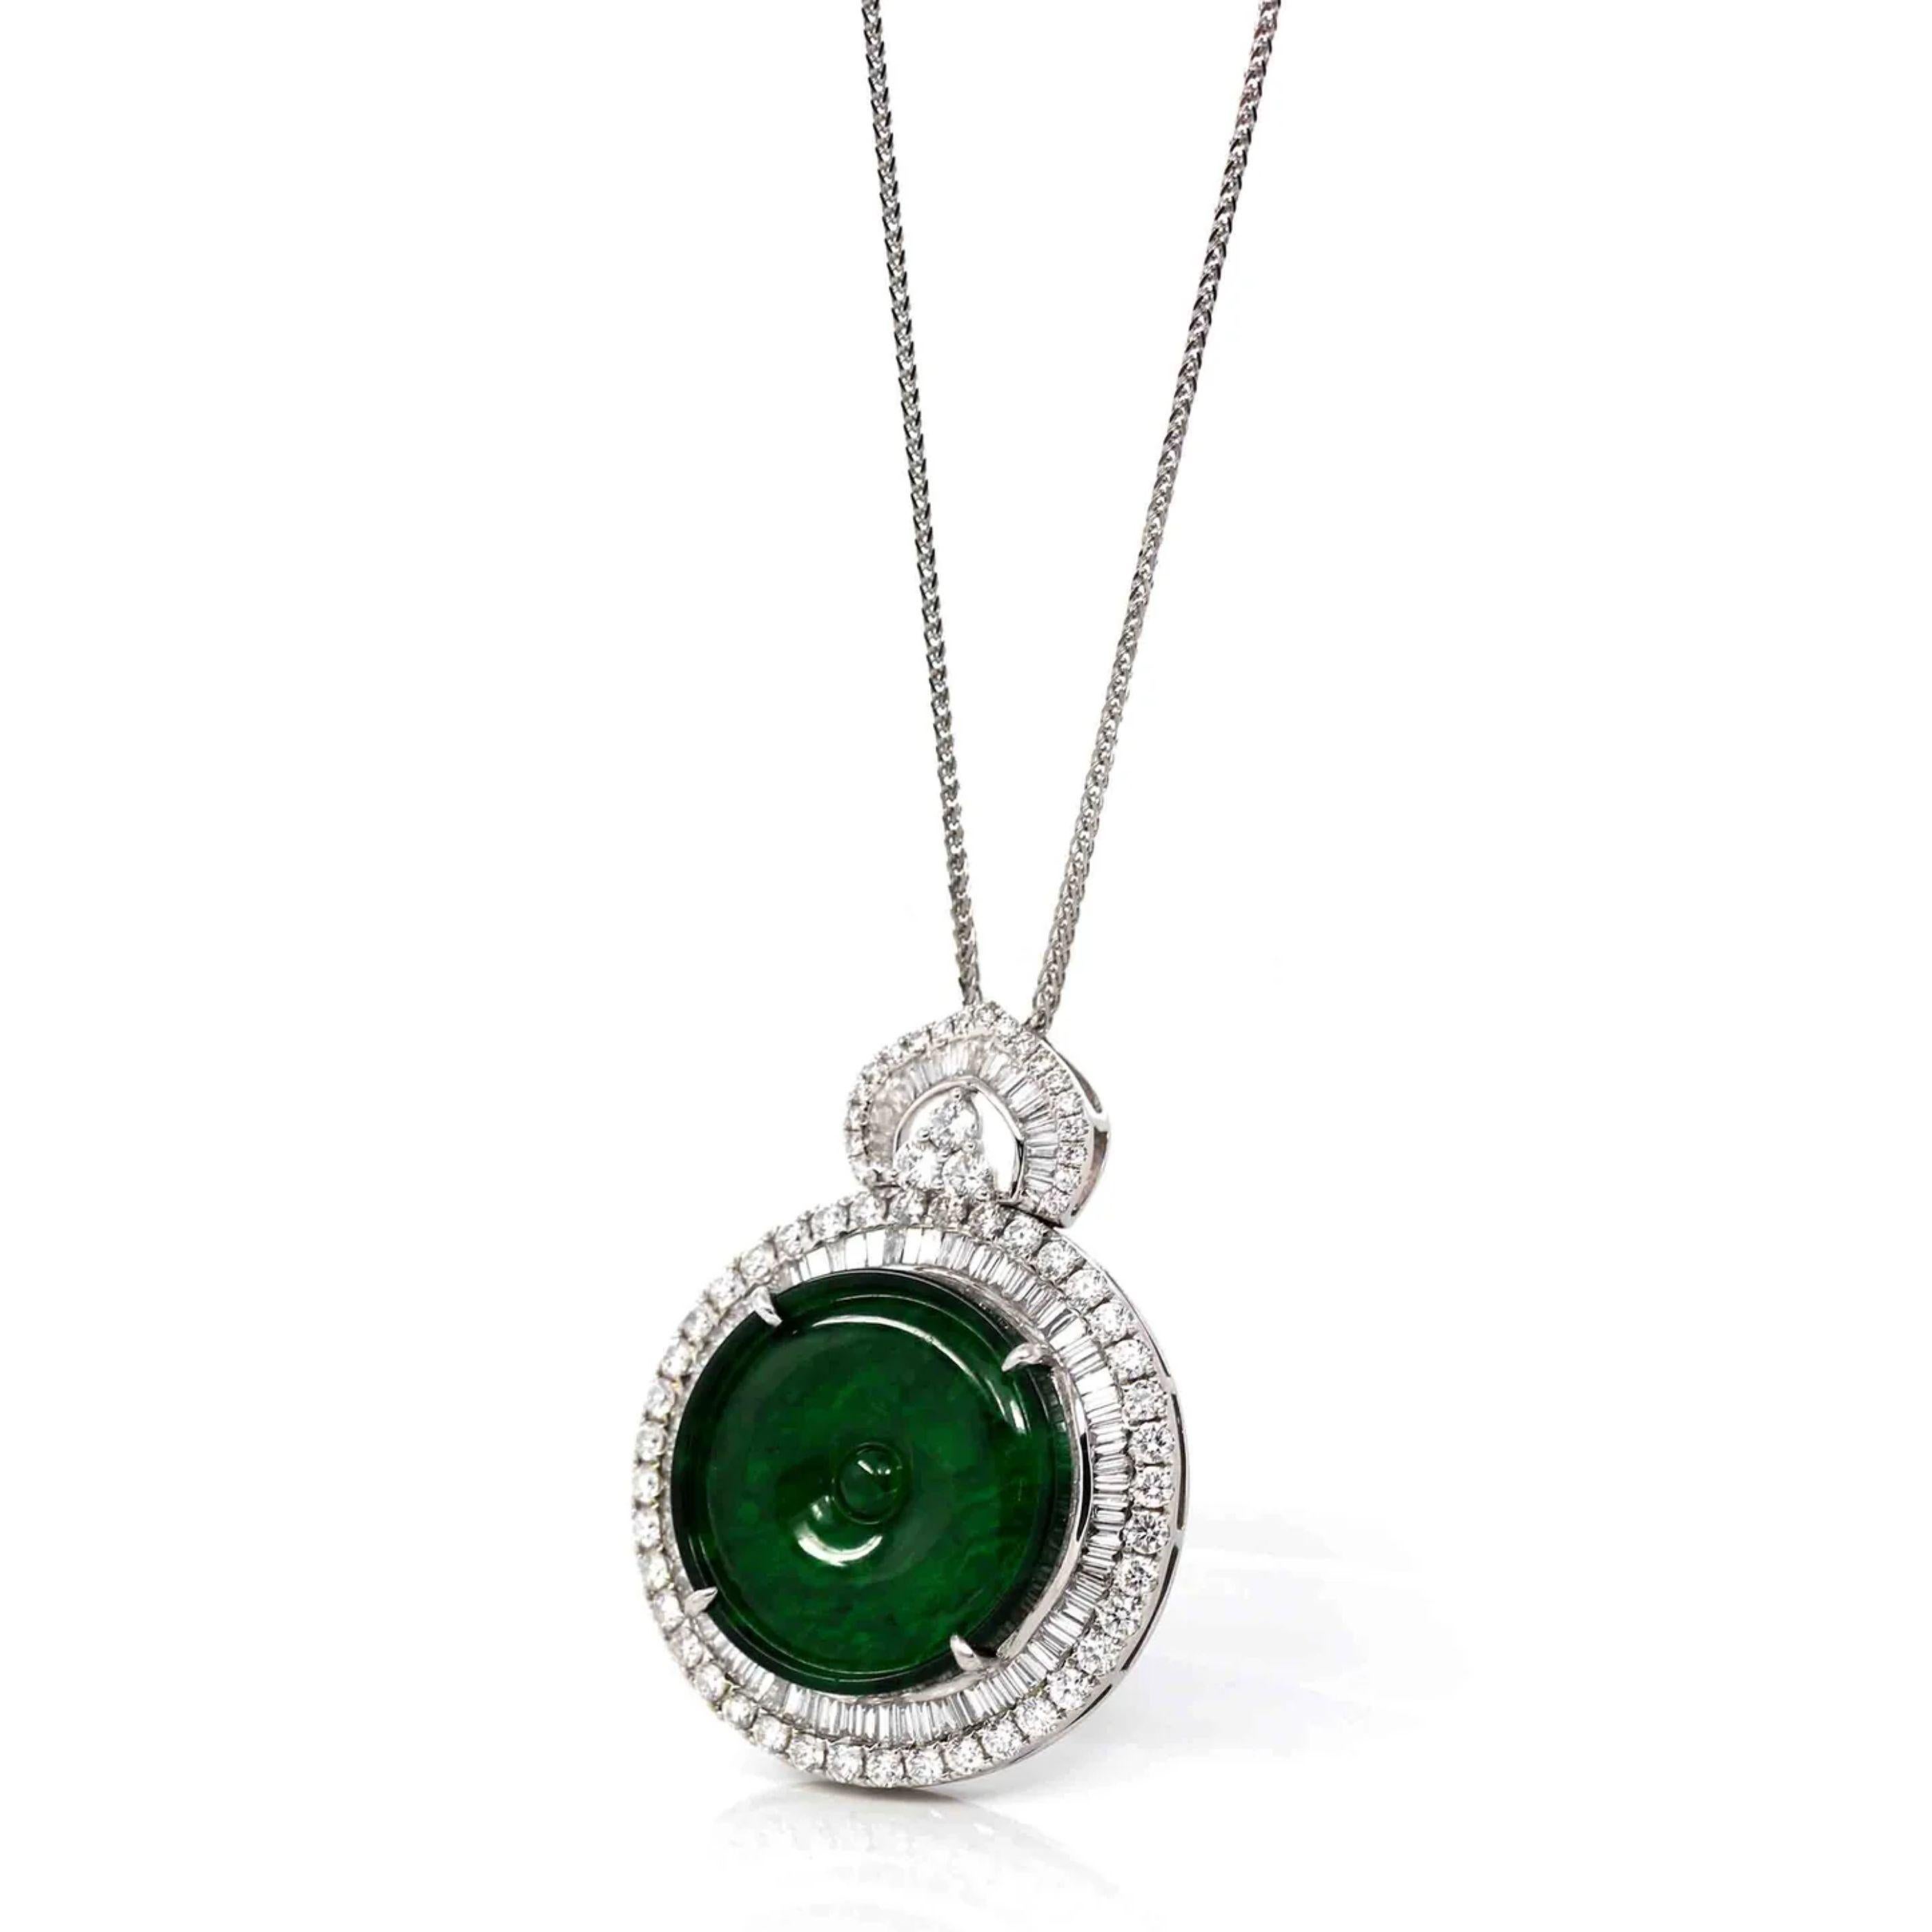 * DESIGN CONCEPT--- This necklace is made with very high-quality genuine imperial green Burmese jadeite jade. The design was inspired by the simplistic yet elegant shape of a lucky KouKou. Representing wholeness, completeness, and contentment. The